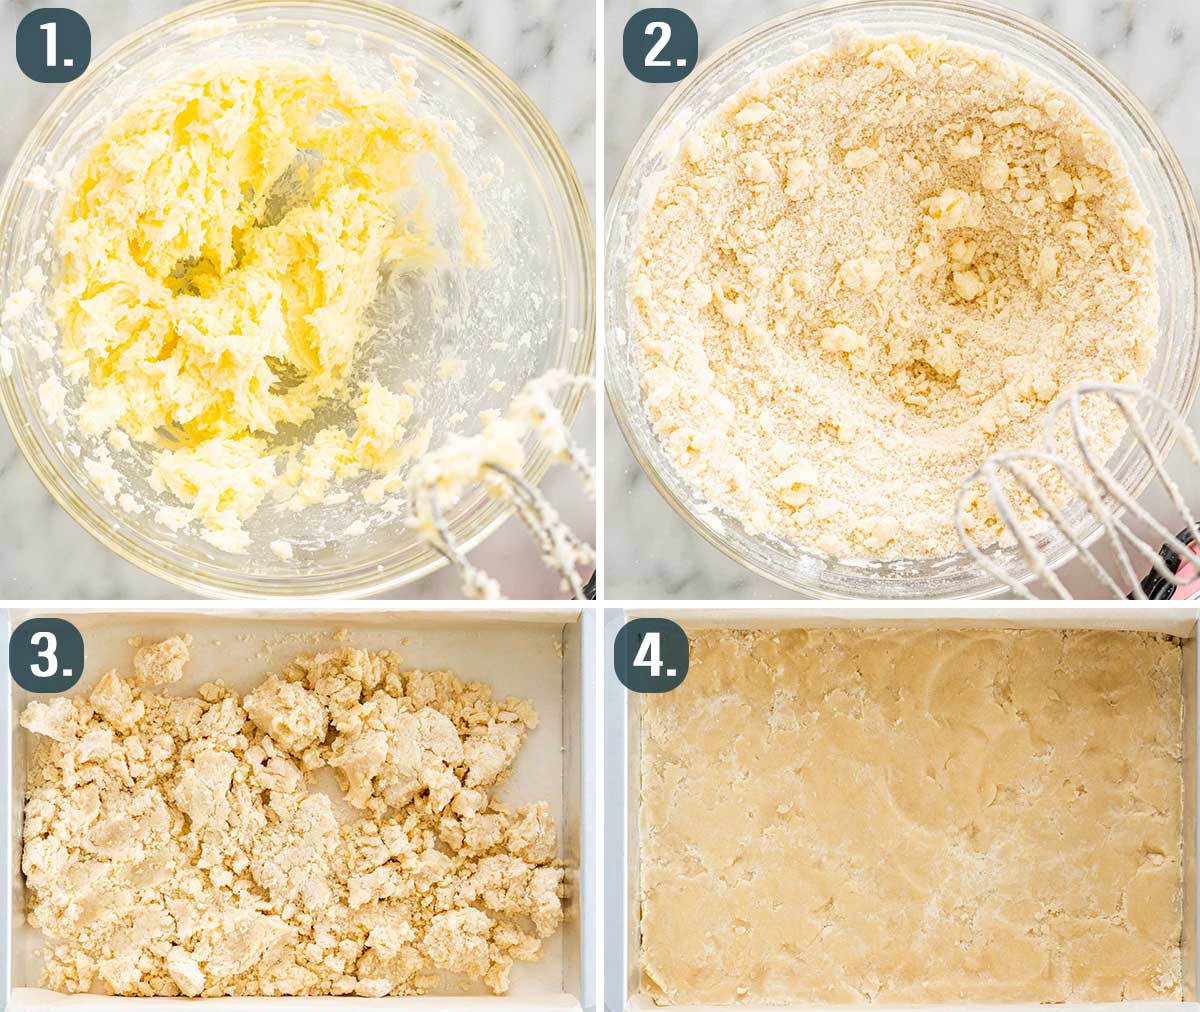 process shots showing how to make crust for lemon bars.